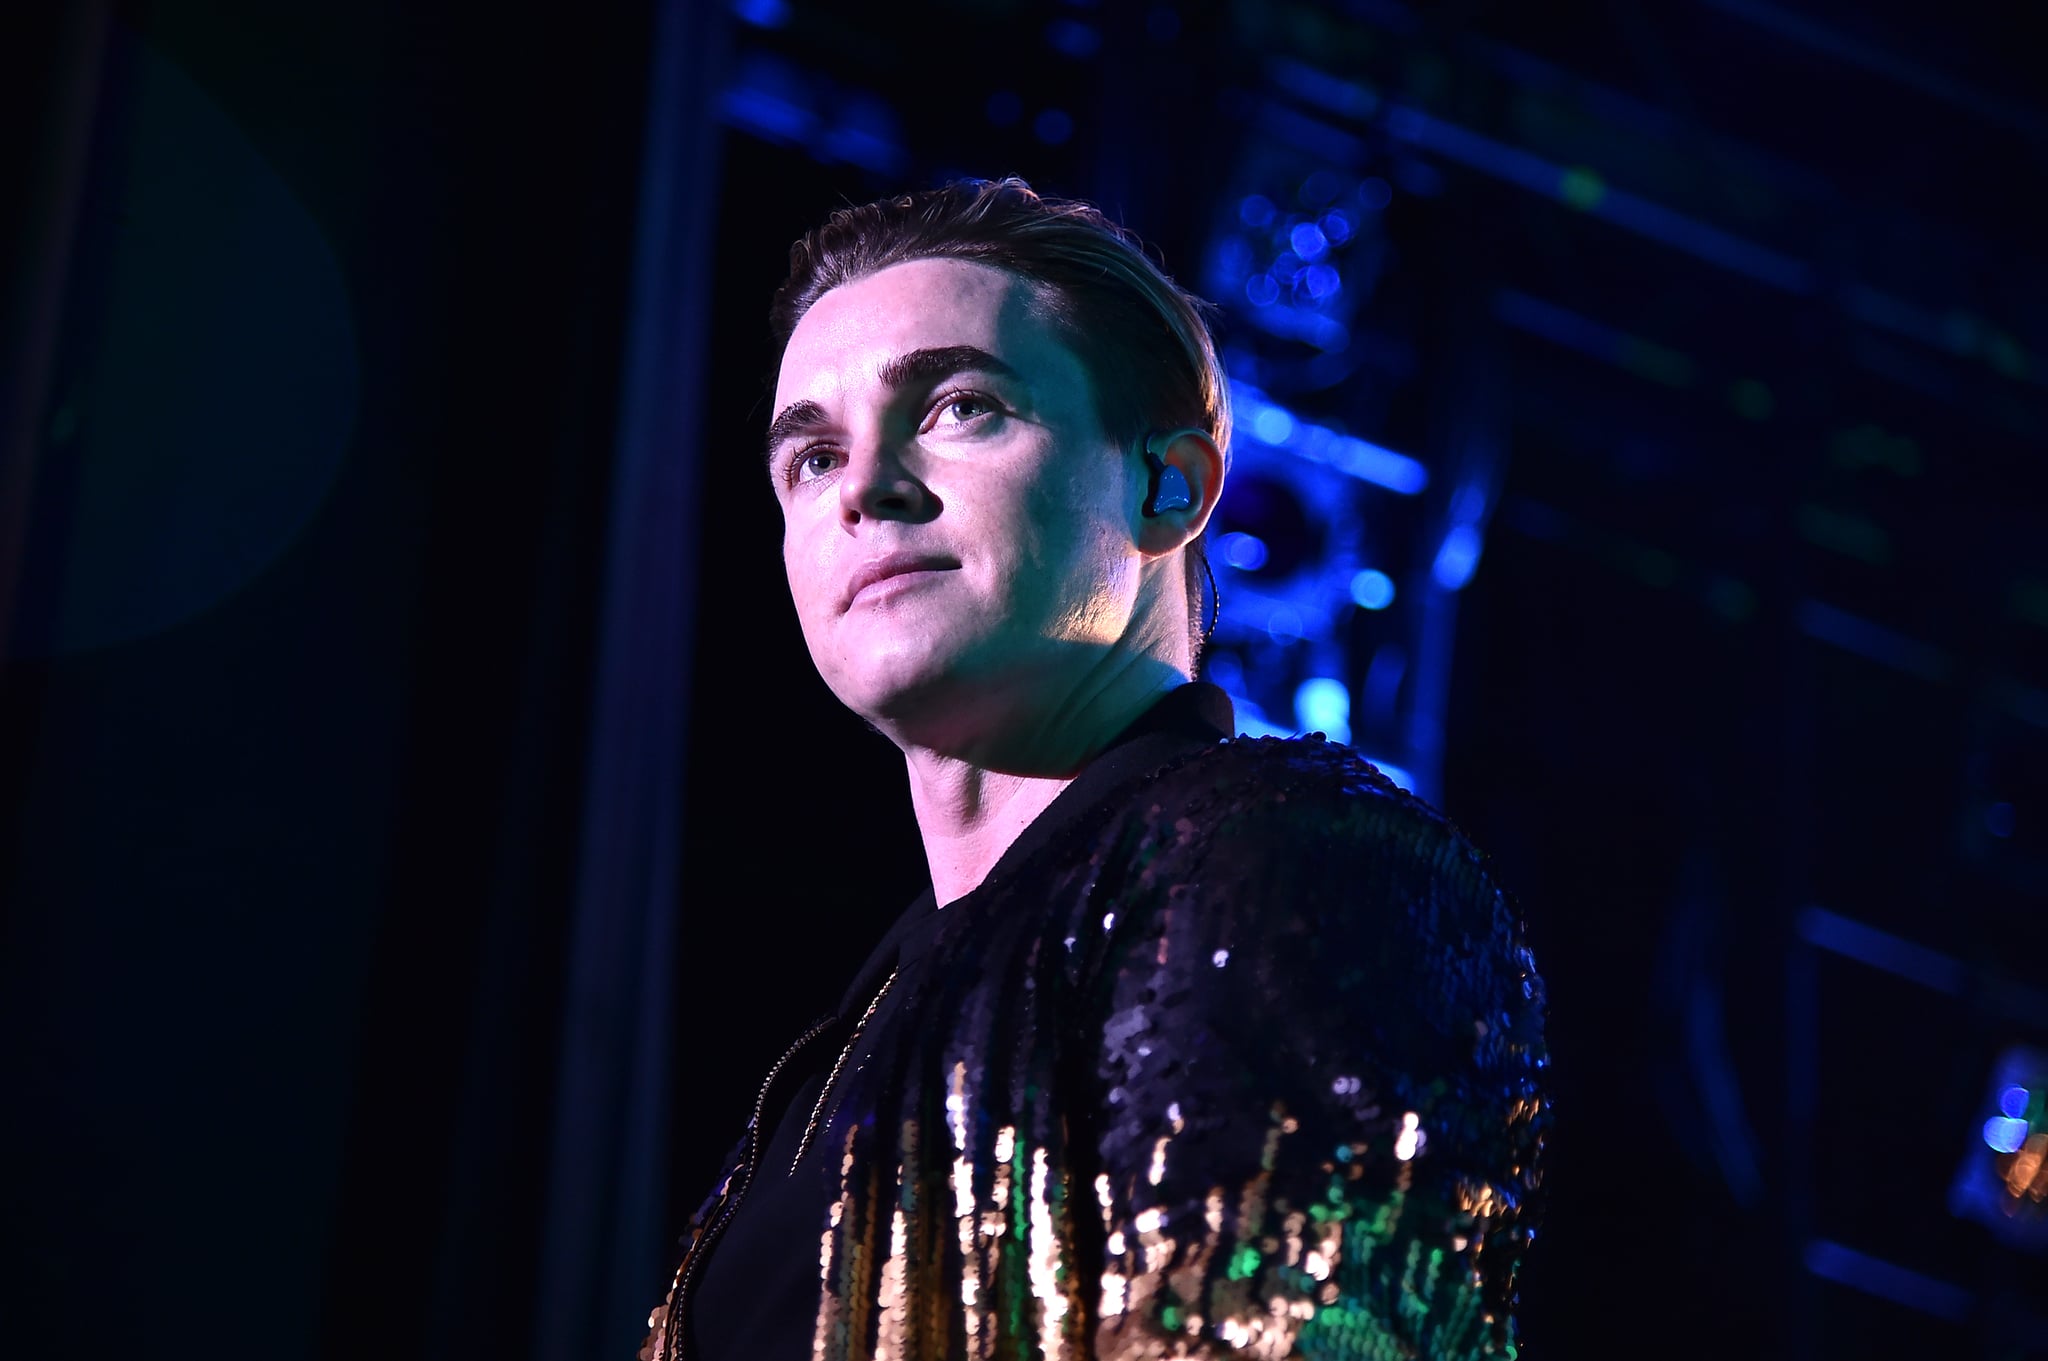 NEW YORK, NEW YORK - JANUARY 21: Jesse McCartney performs at PlayStation Theatre on January 21, 2019 in New York City. (Photo by Theo Wargo/Getty Images)